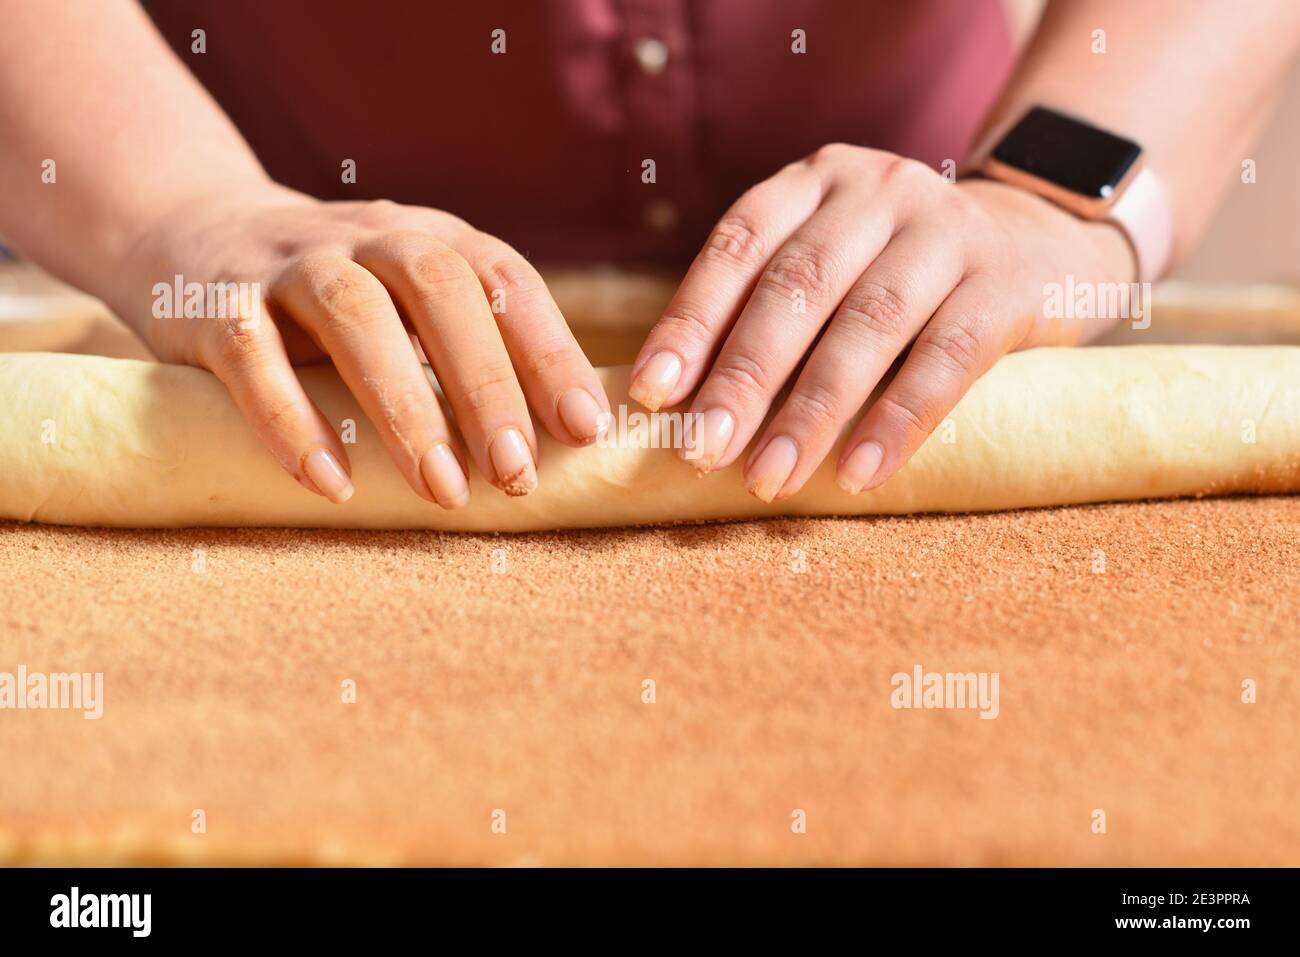 Housewife makes cinnamon rolls, making homemade pastry Stock Photo